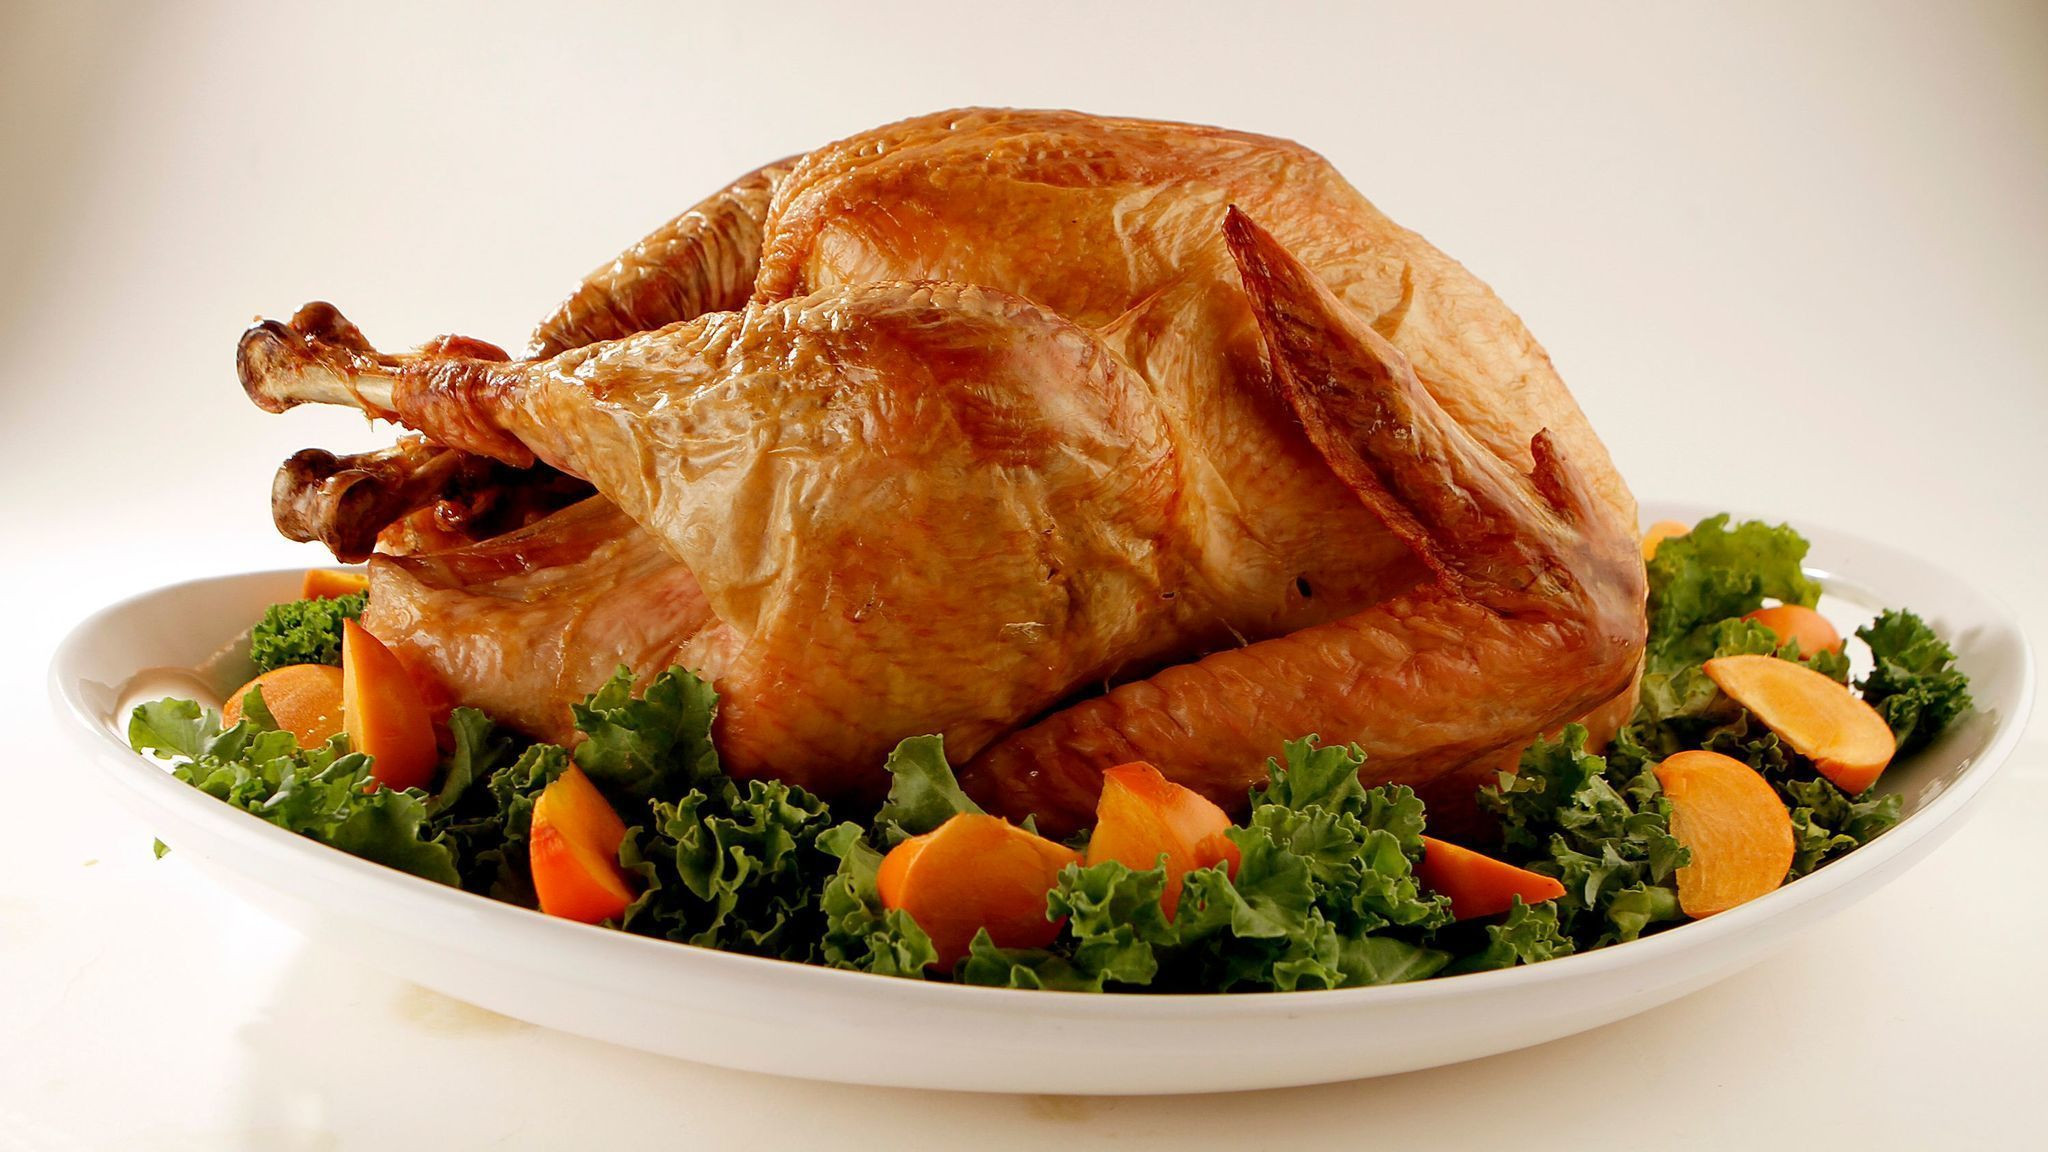 Pictures Of Turkey For Thanksgiving
 A beginner s guide to cooking a Thanksgiving turkey LA Times